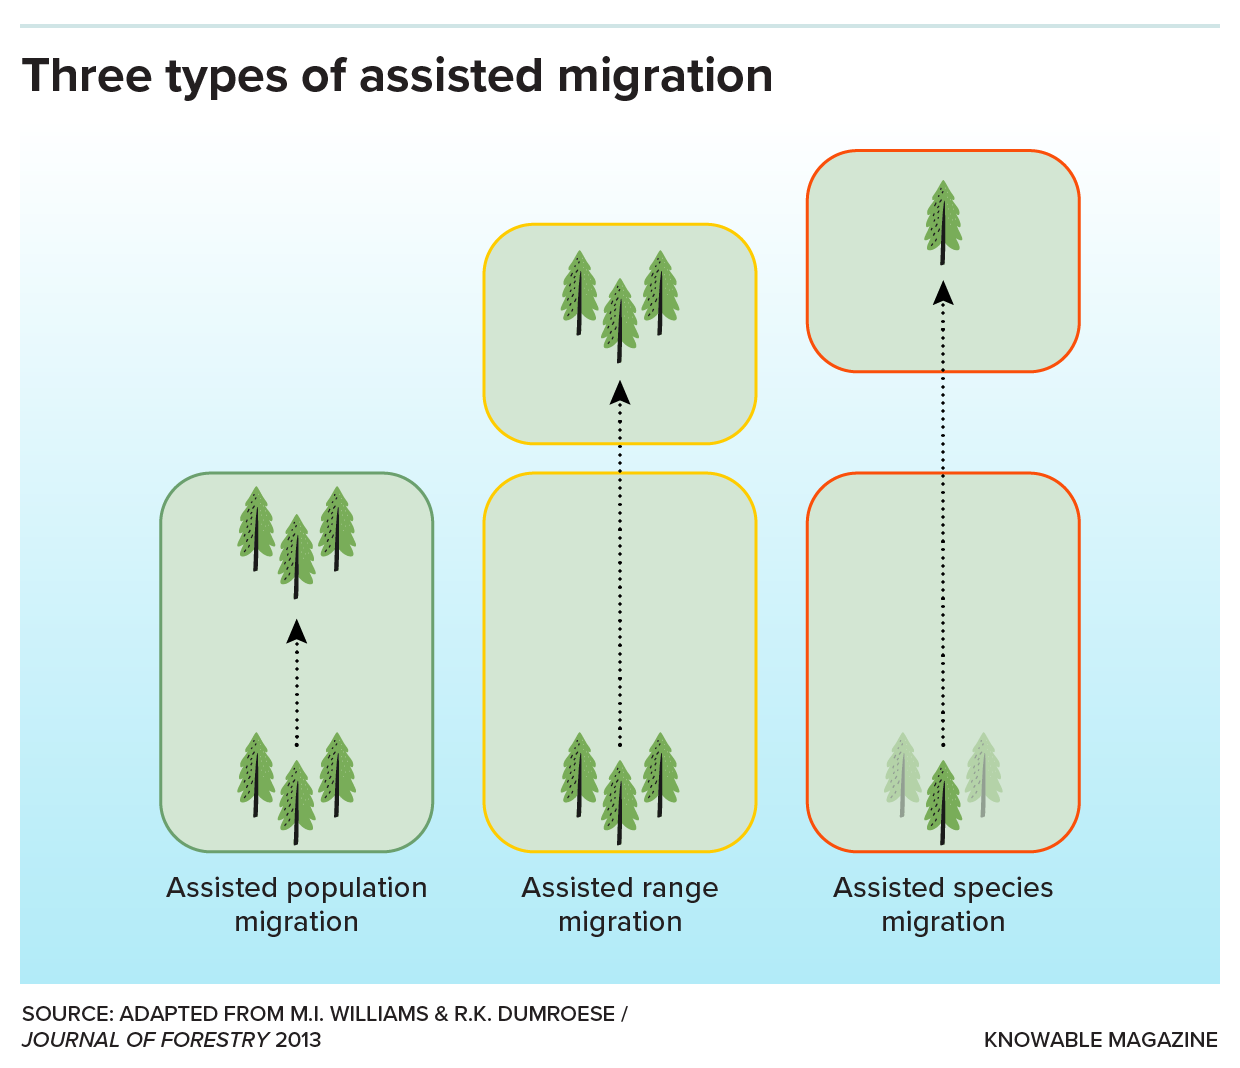 Graphic depicts what occurs in the three types of assisted migration.